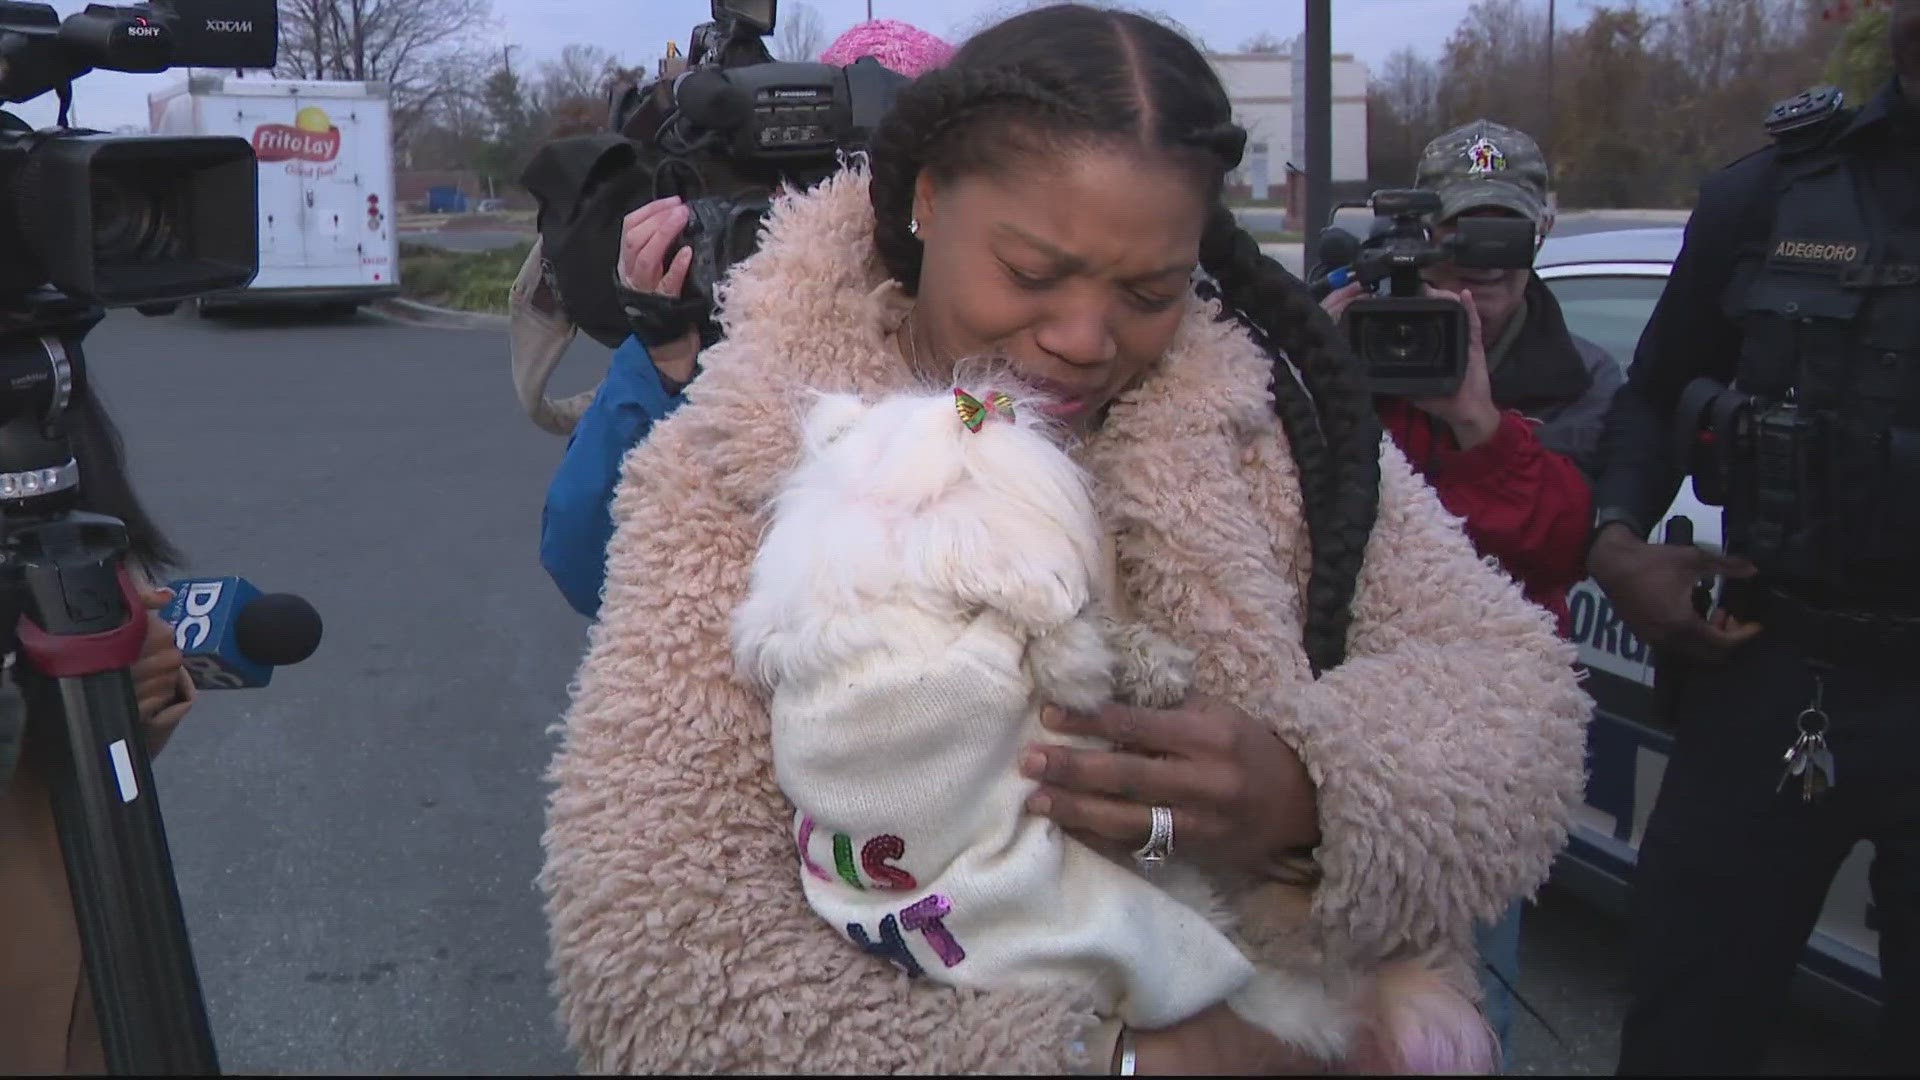 Two days after a 16-year-old dog was taken during a carjacking in broad daylight at a gas station in Capitol Heights, the pet has been found.